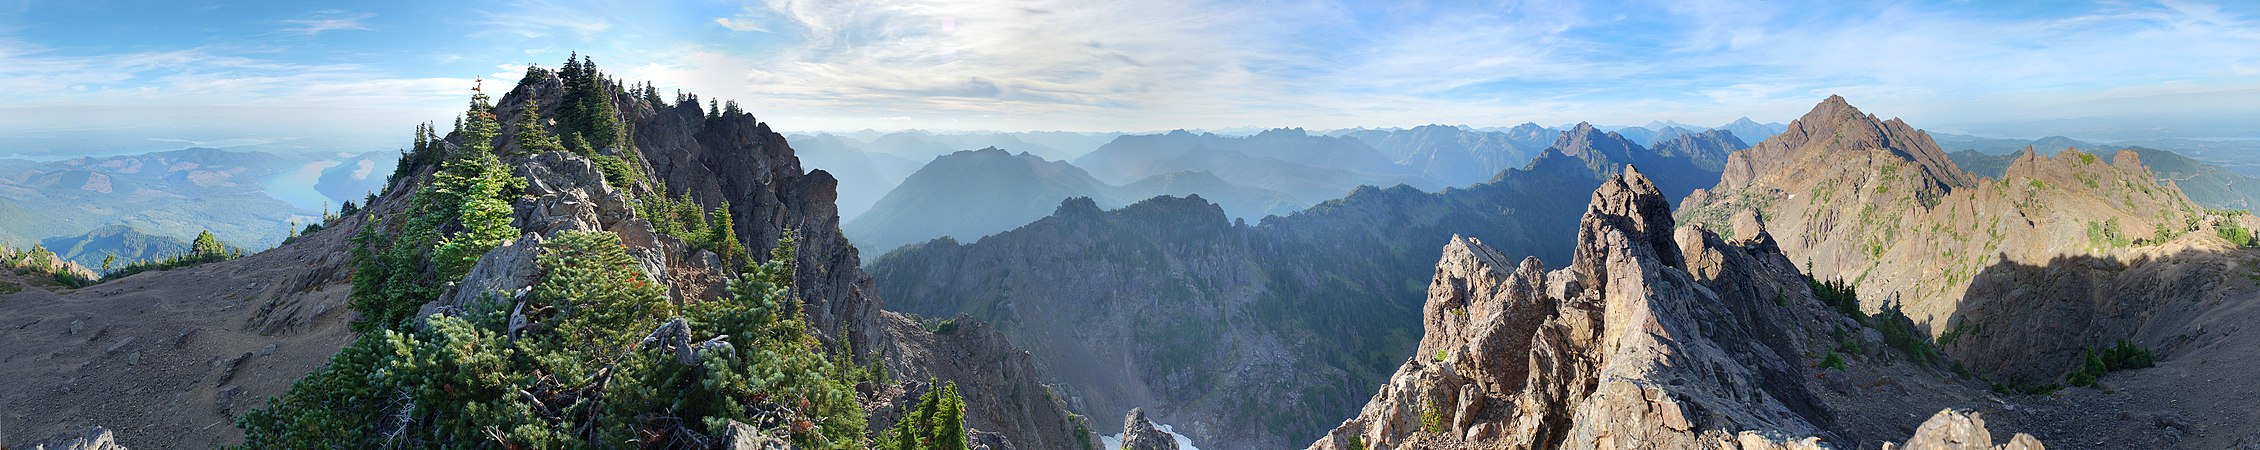 Panorama from near the summit of Mount Ellinor, by Gregg M. Erickson